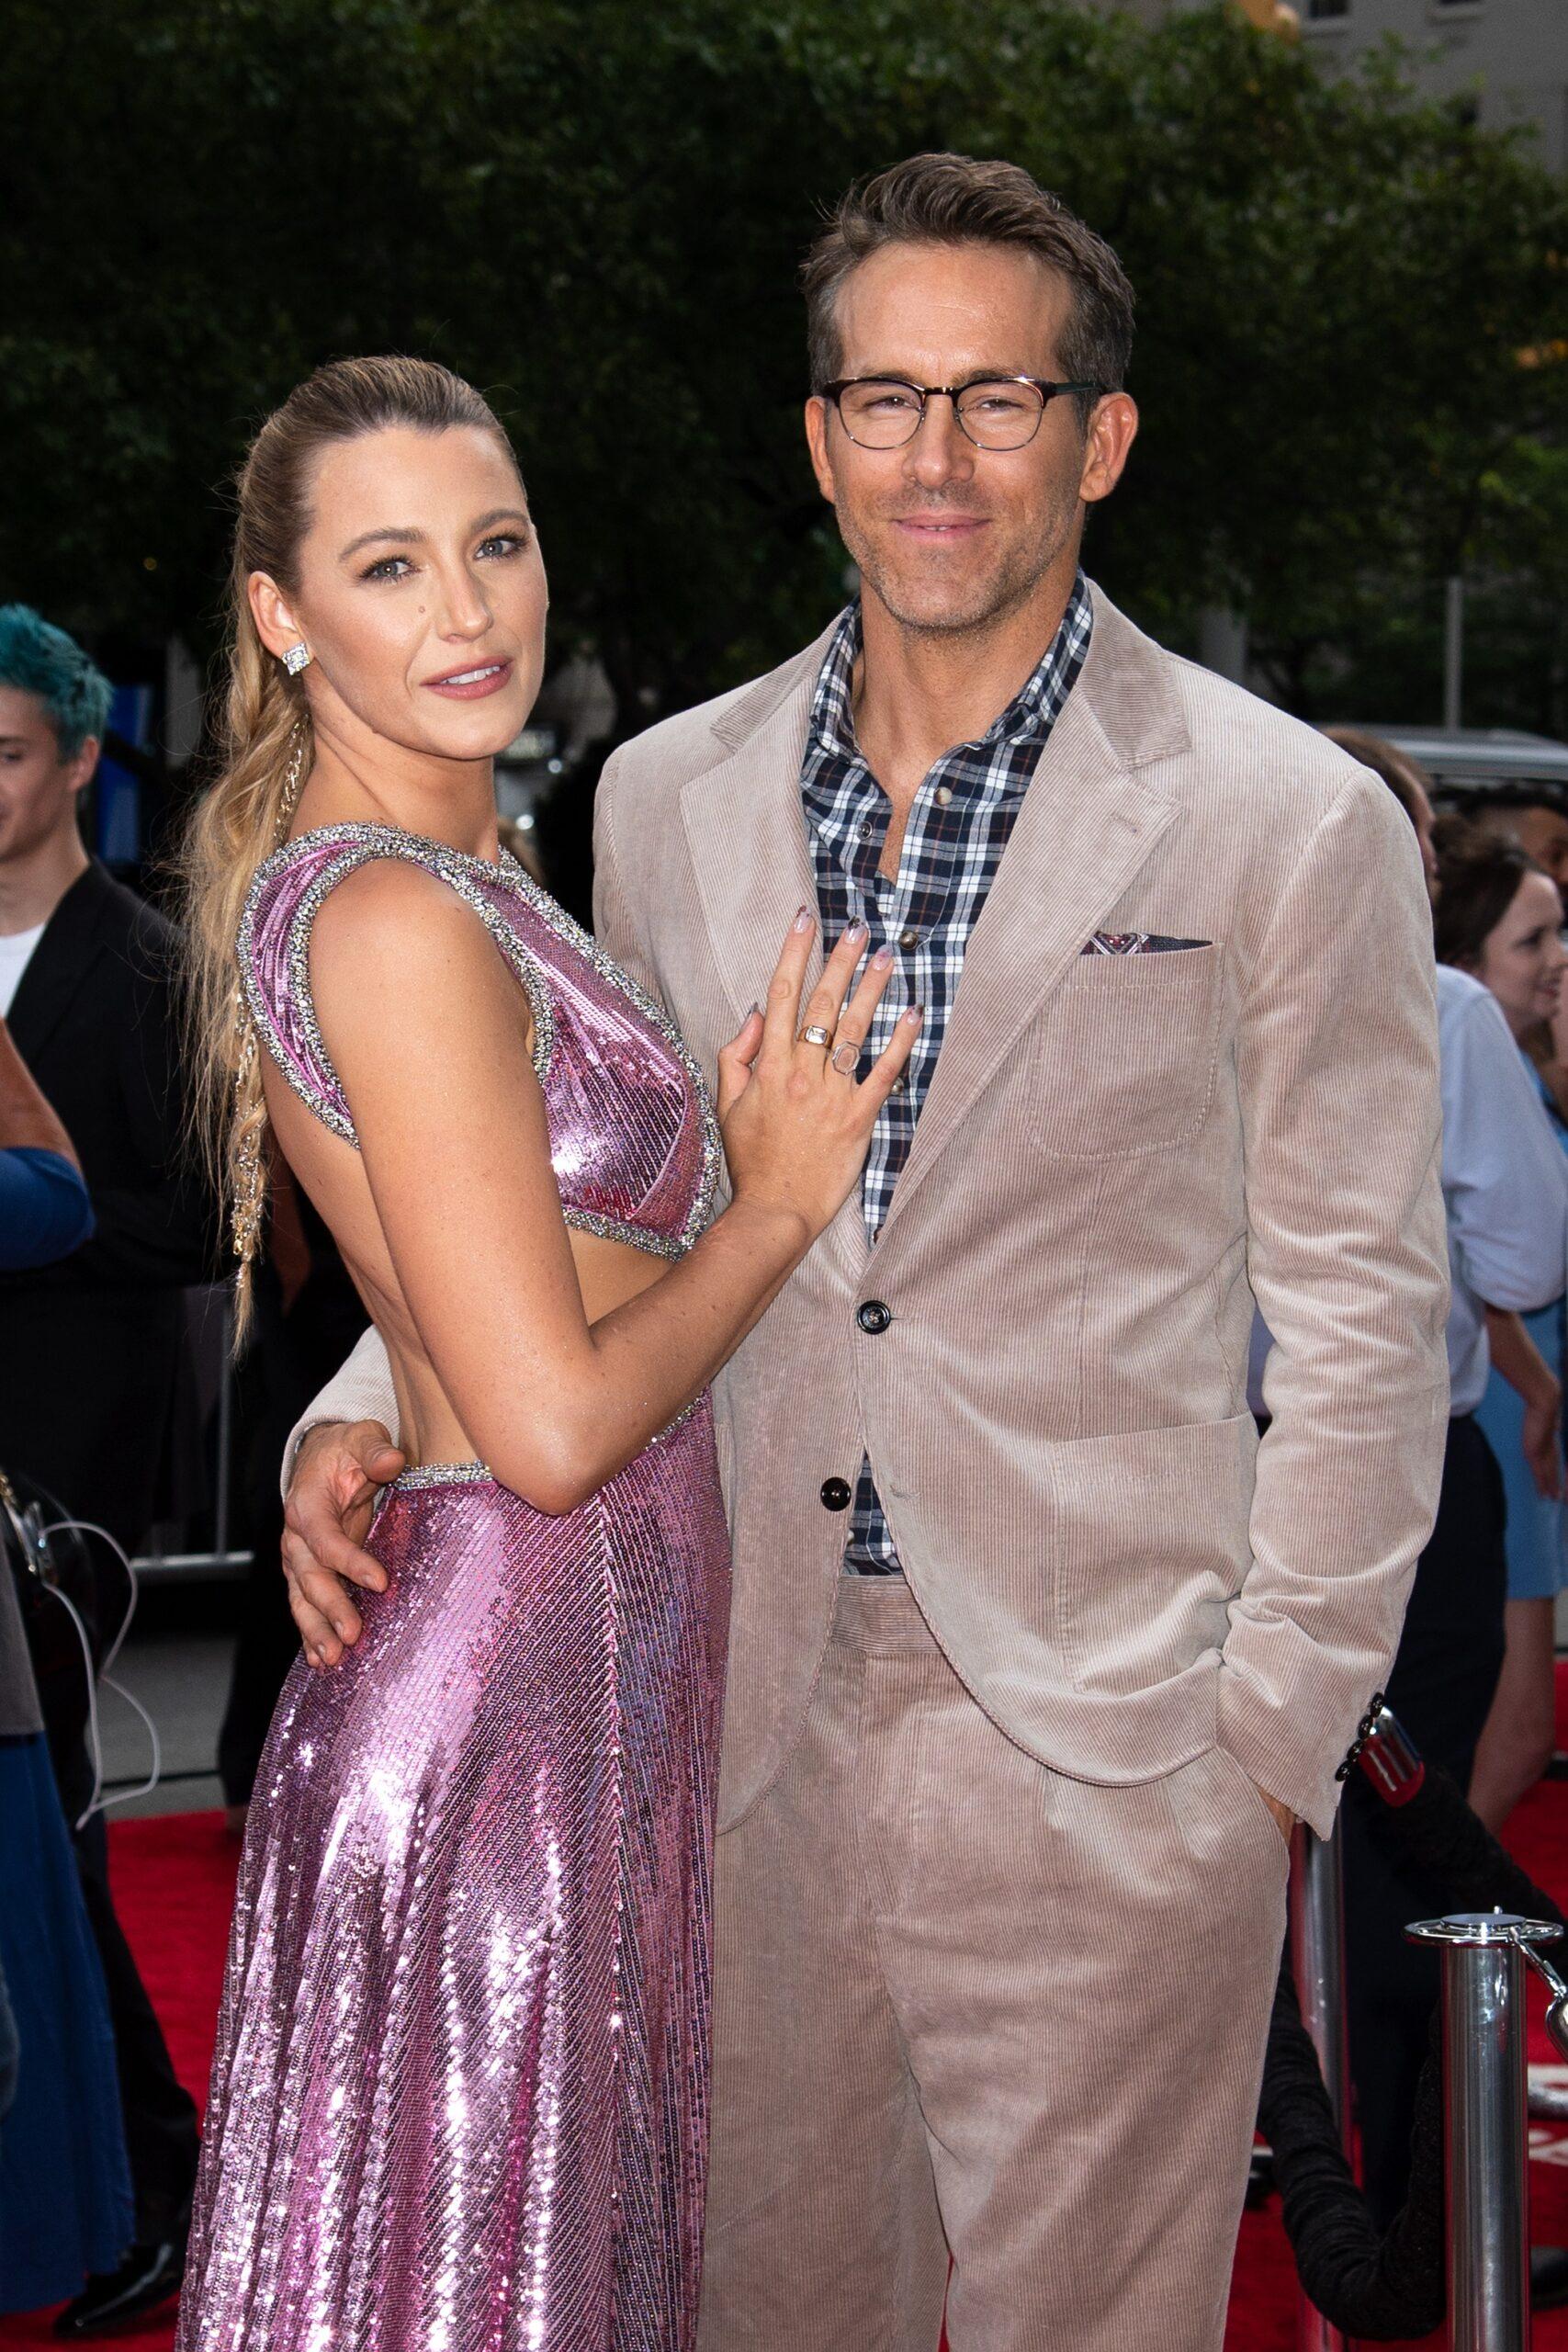 Blake Lively and Ryan Reynolds at NYC "Free Guy" Premiere